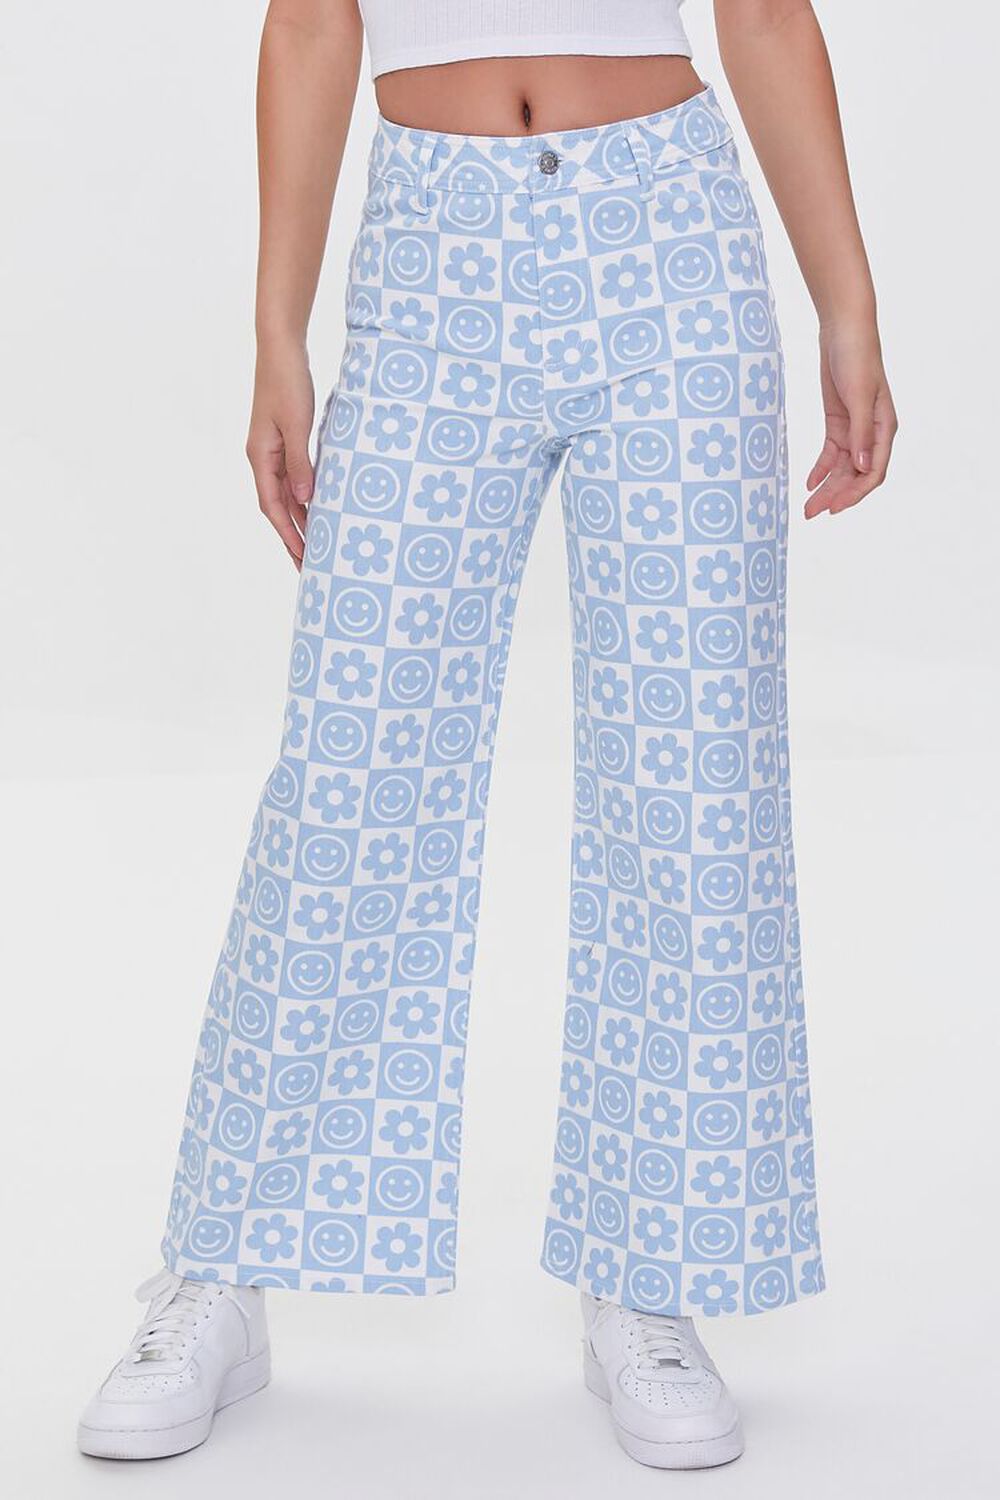 BLUE/WHITE Checkered Happy Face Jeans, image 2